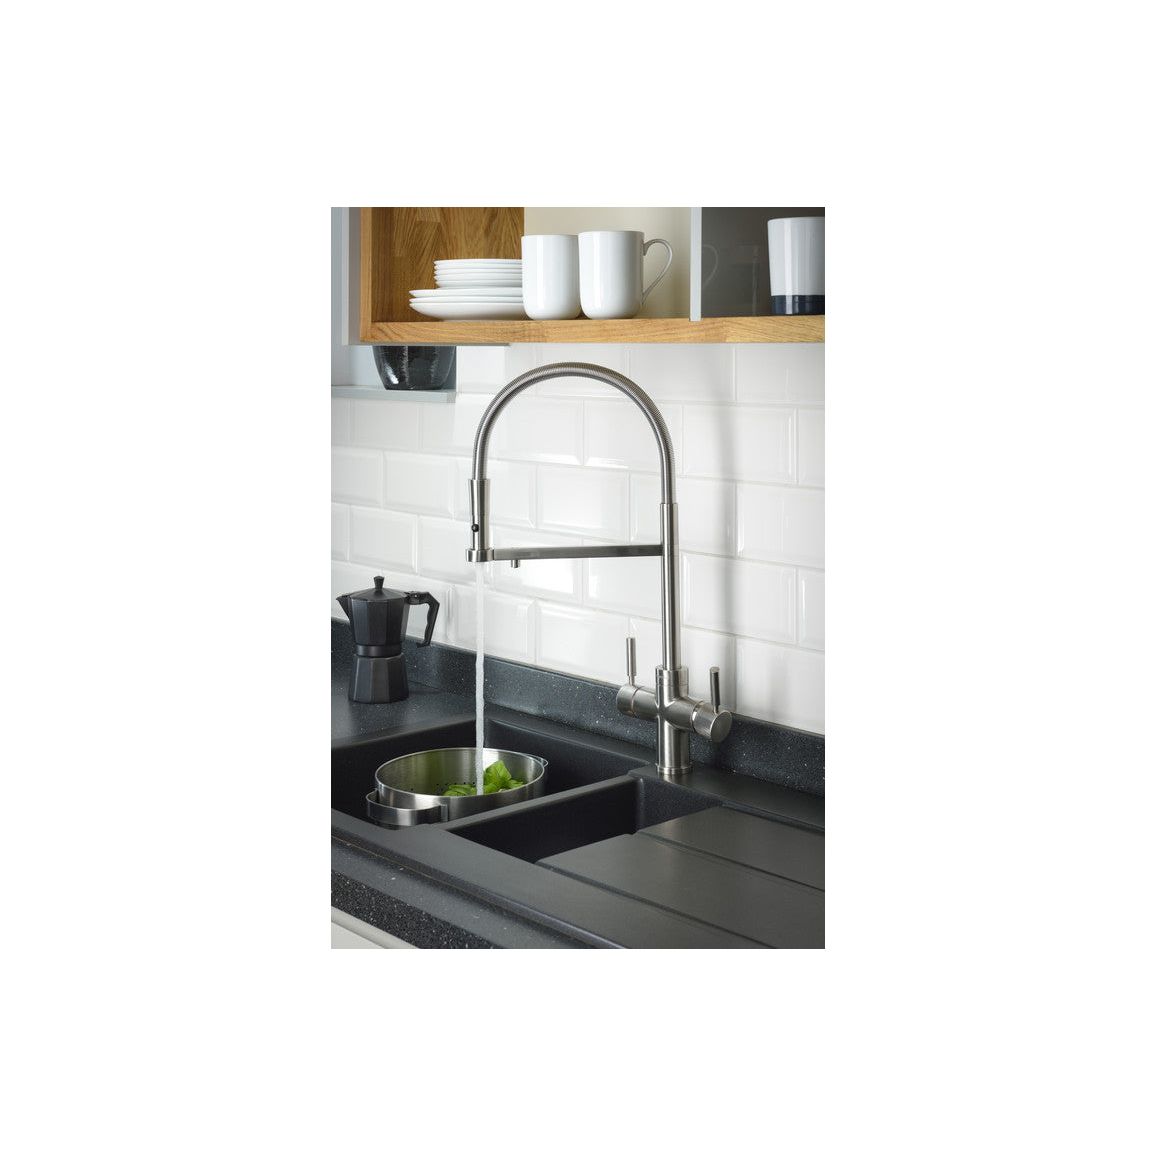 Abode 3 IN 1 Professional Monobloc Tap - Brushed Nickel